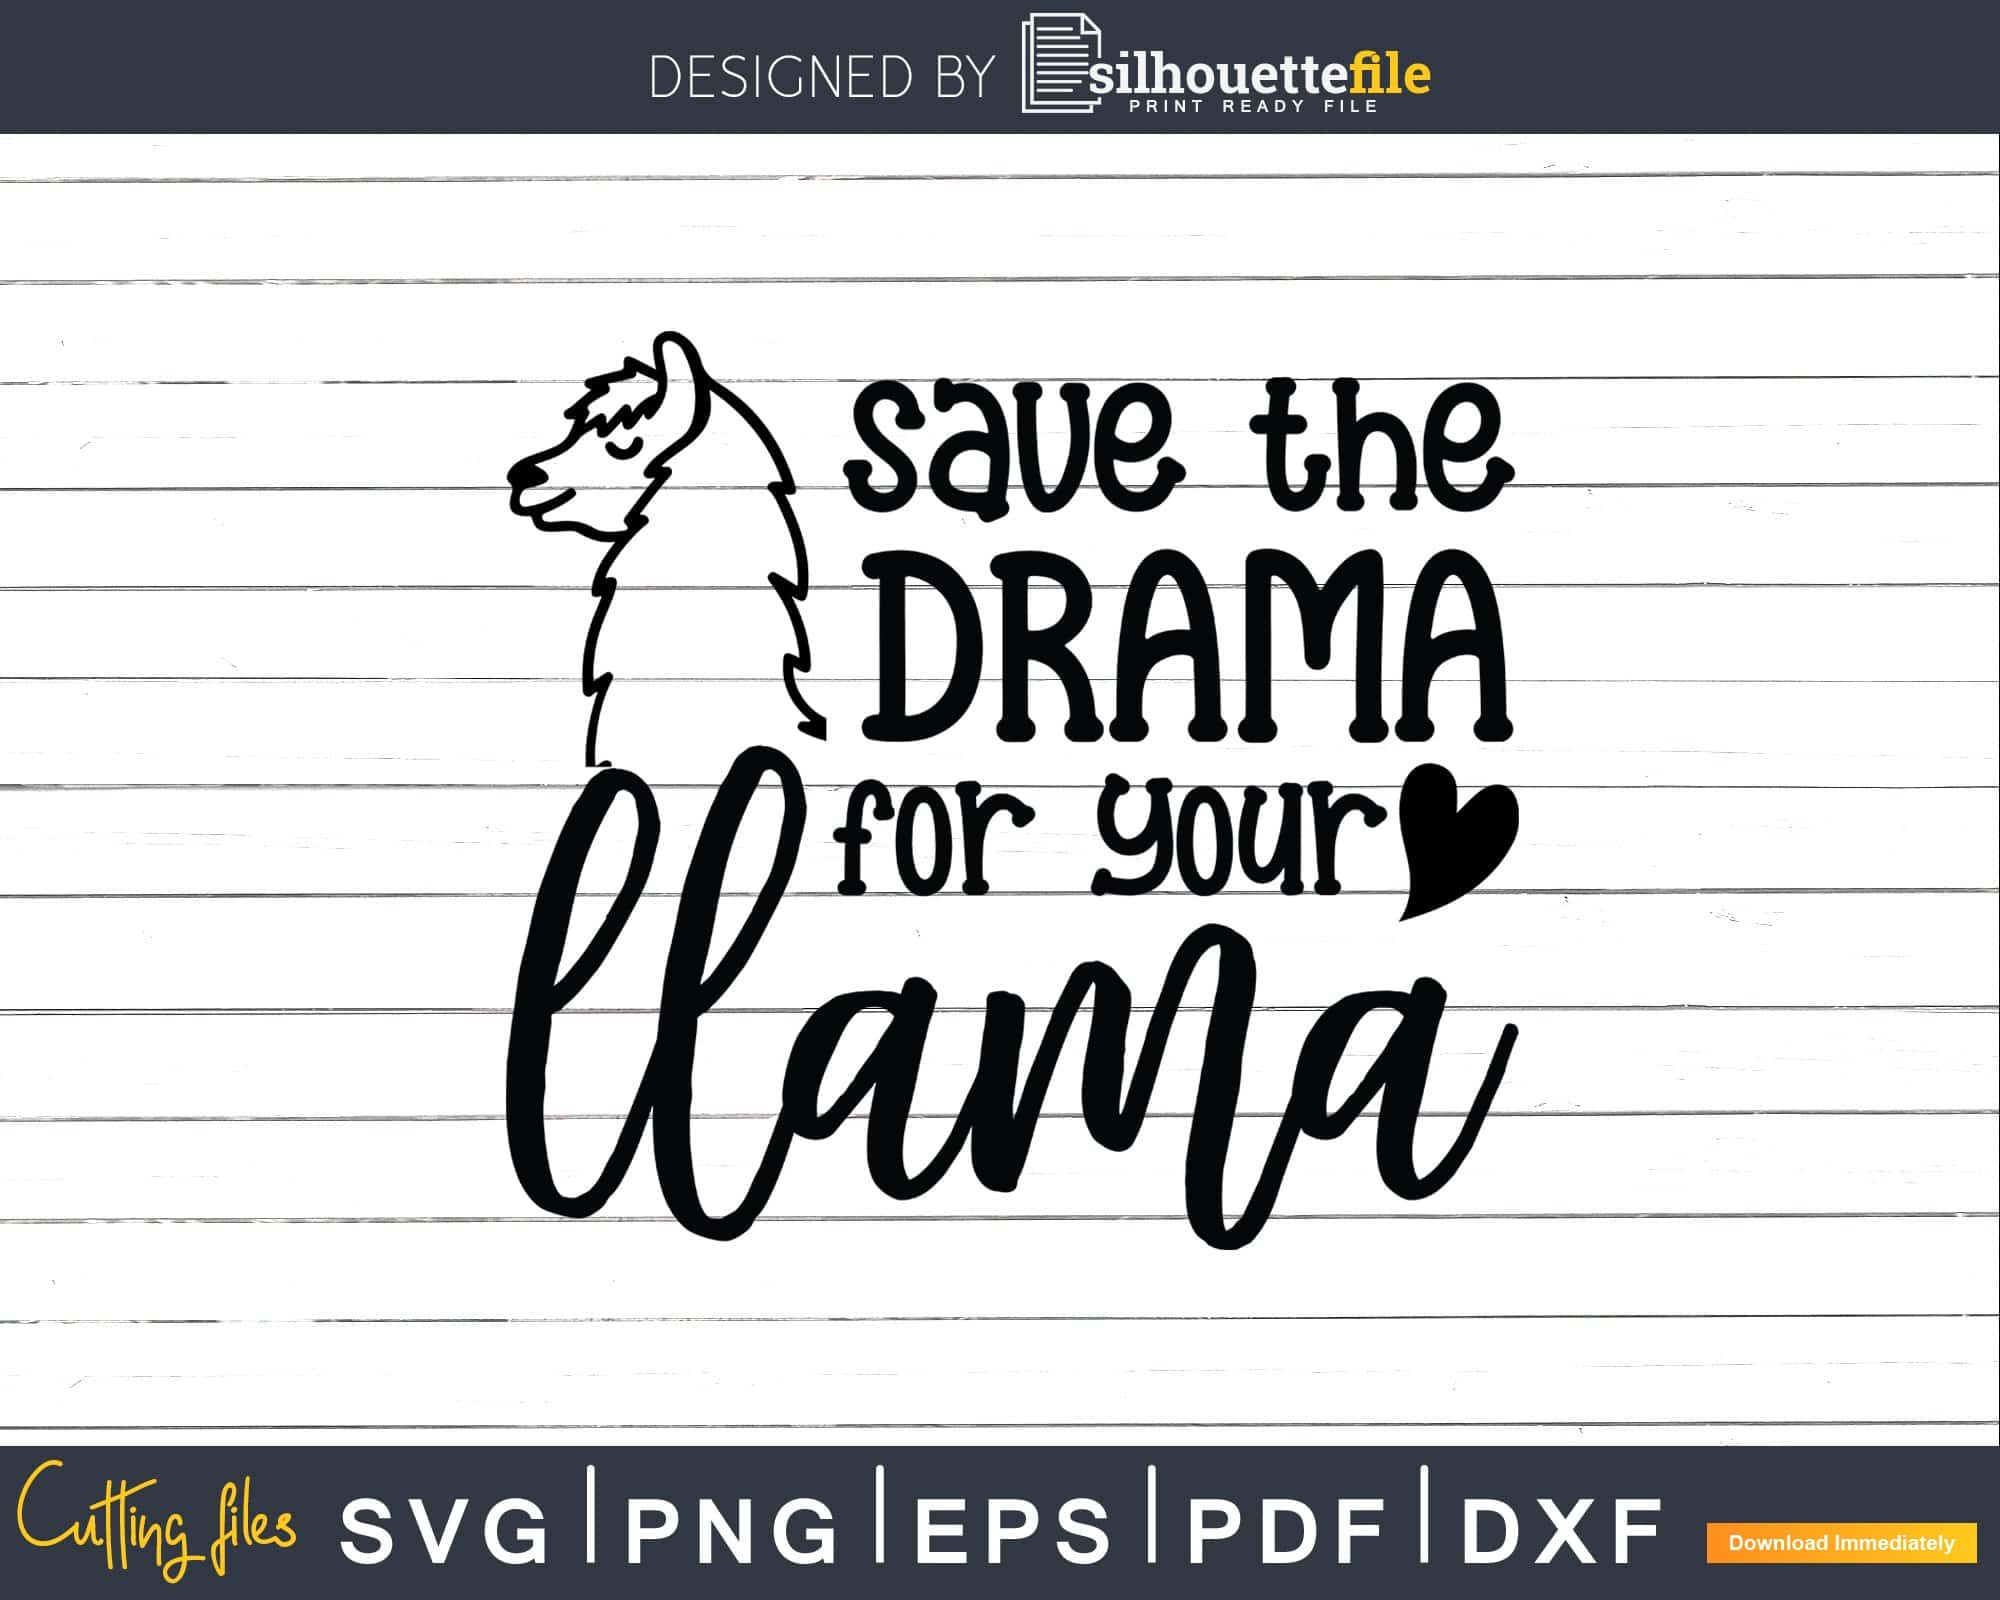 Save The Drama For Your Llama Svg Cut Files Silhouette Silhouettefile